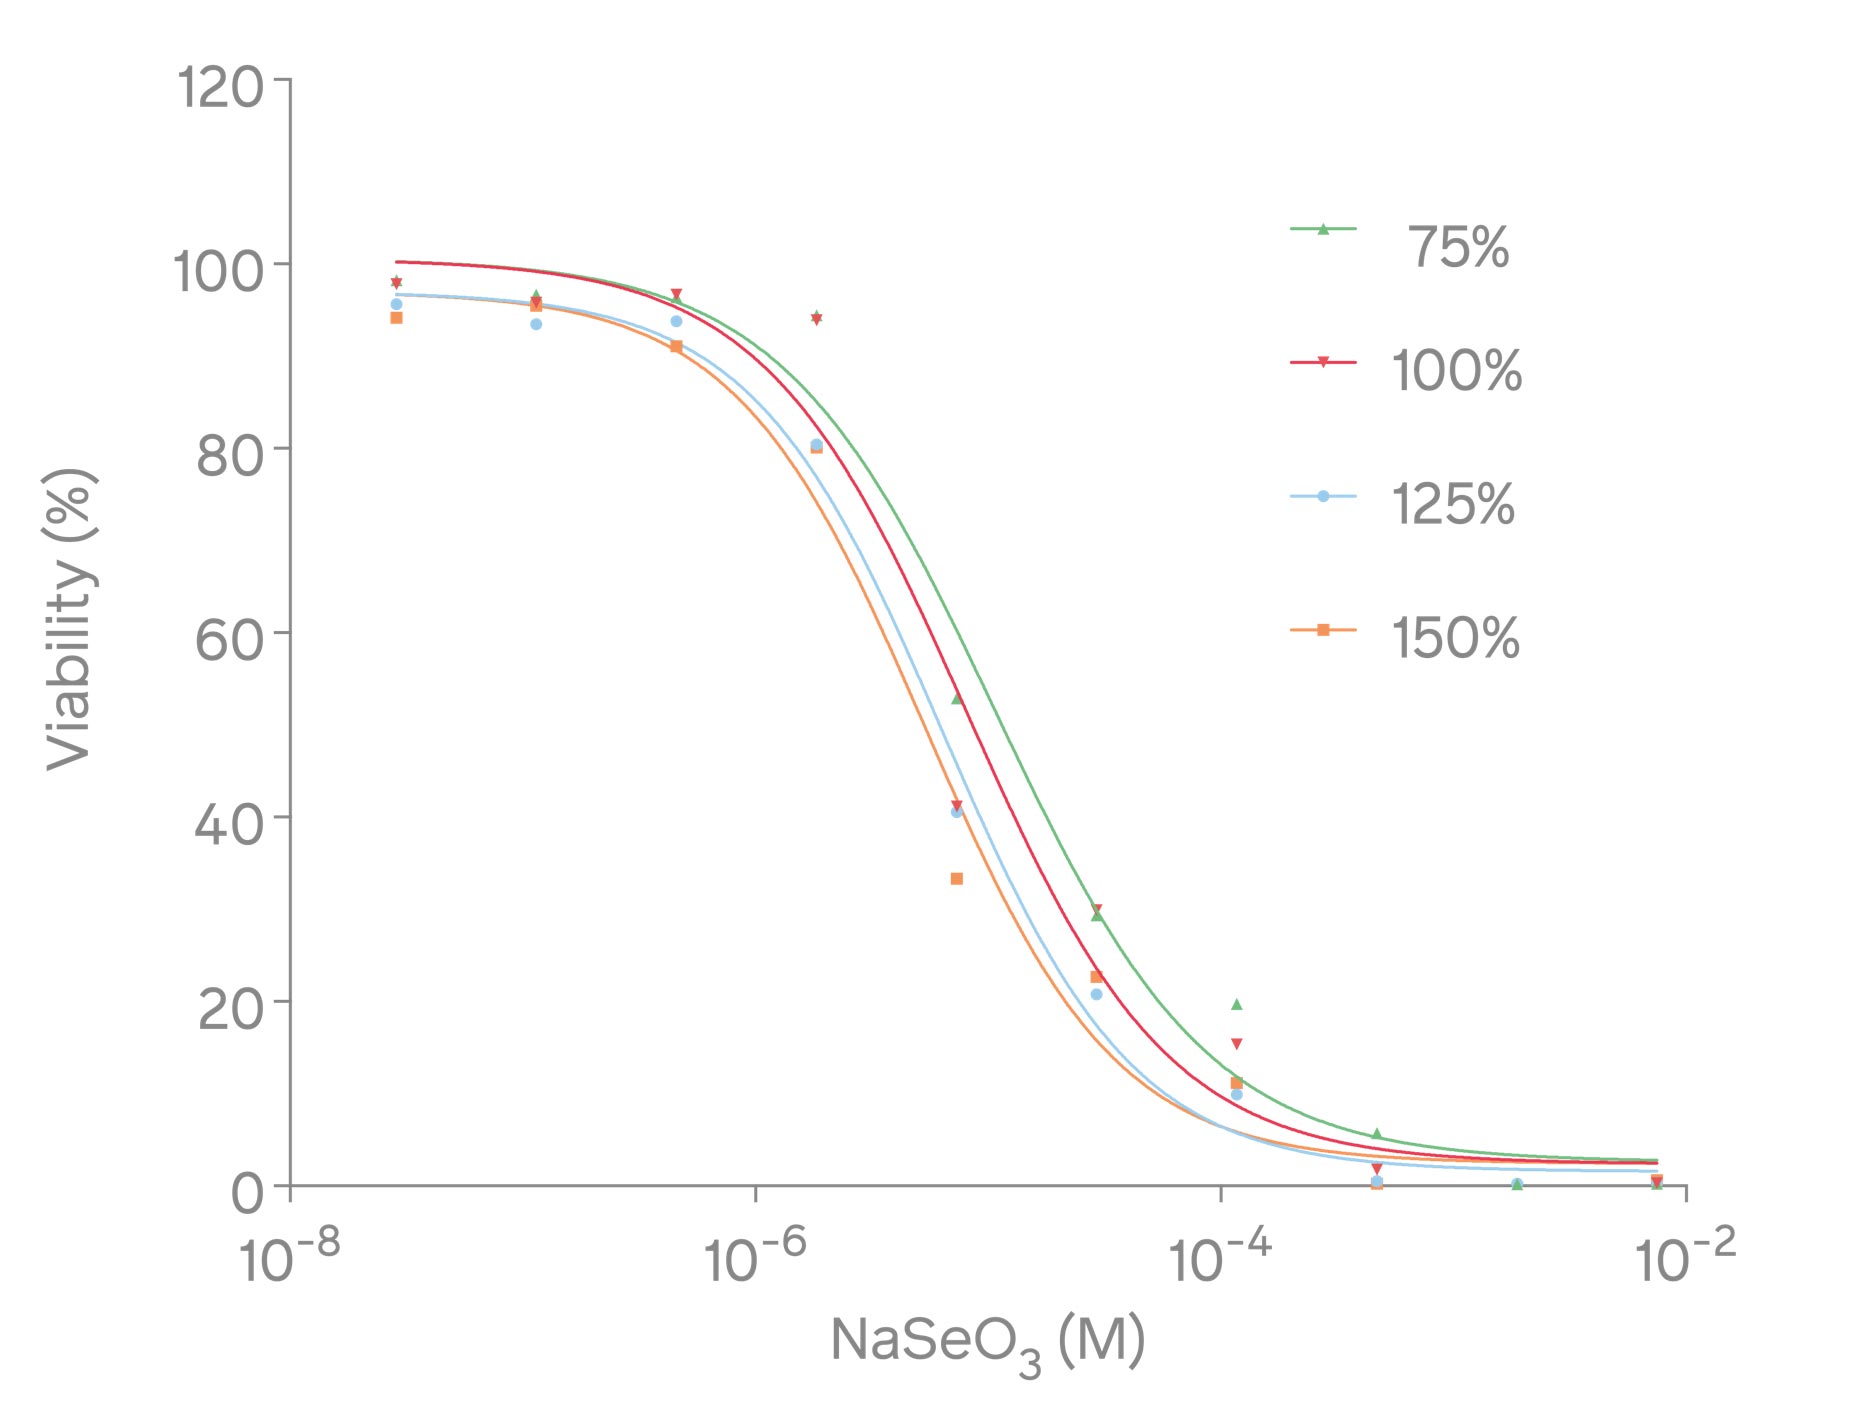 Figure 3: Dose-dependent response curve of sodium selenite with XTT assay Validating Absorbance 96 Application for XTT Assay Using The instaCELL® Cytotoxicity Kit (XTT) Byonoy